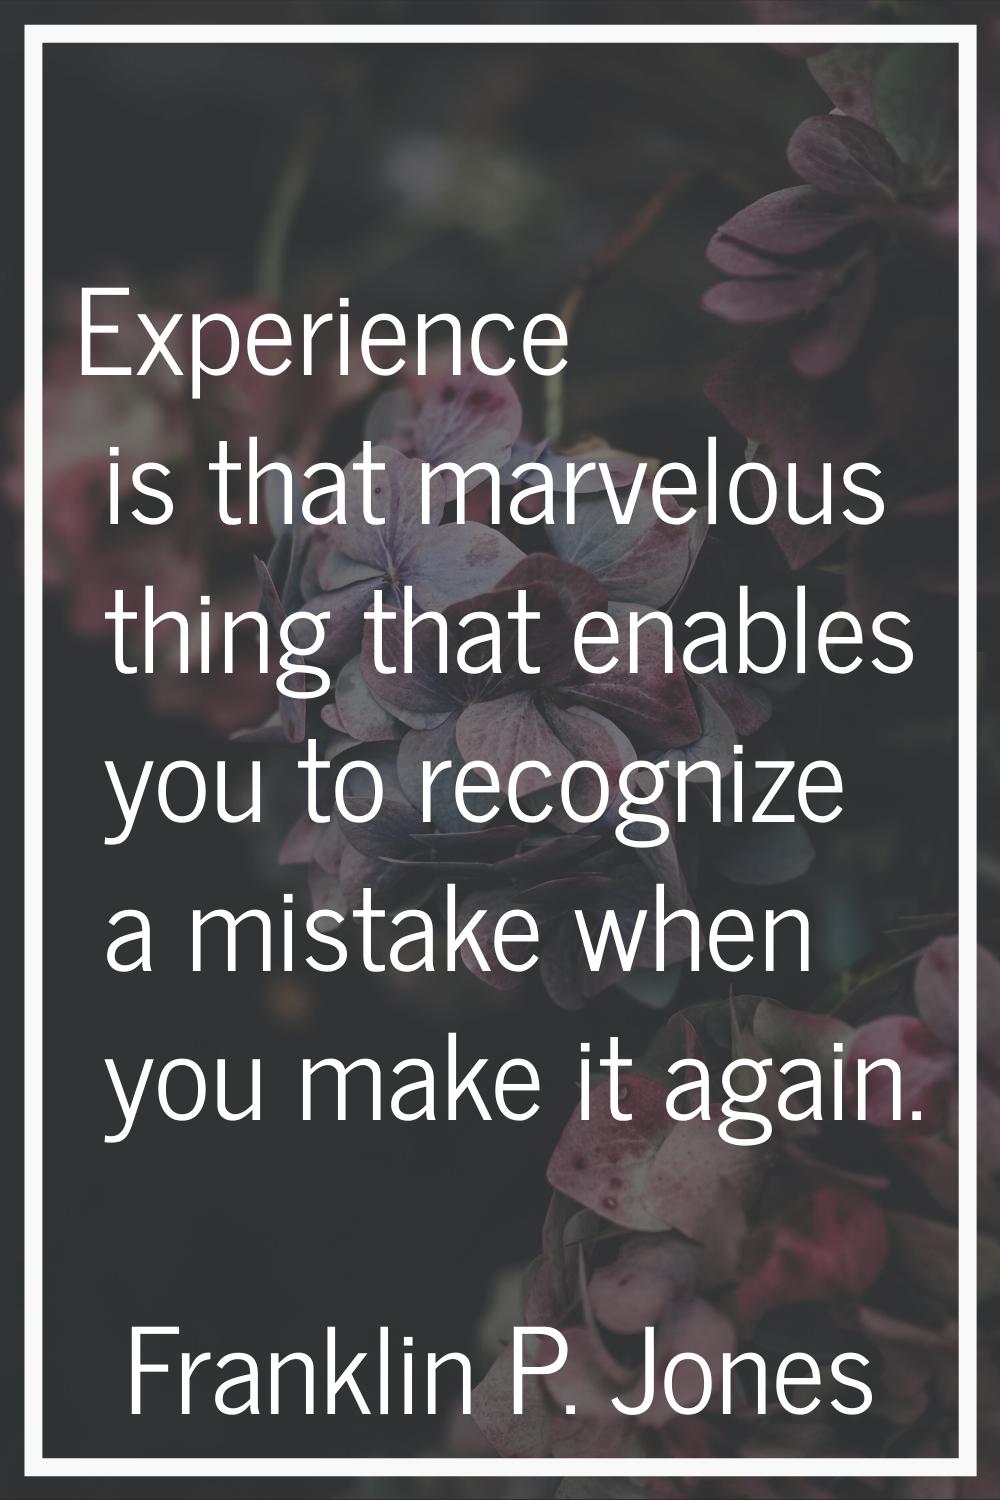 Experience is that marvelous thing that enables you to recognize a mistake when you make it again.